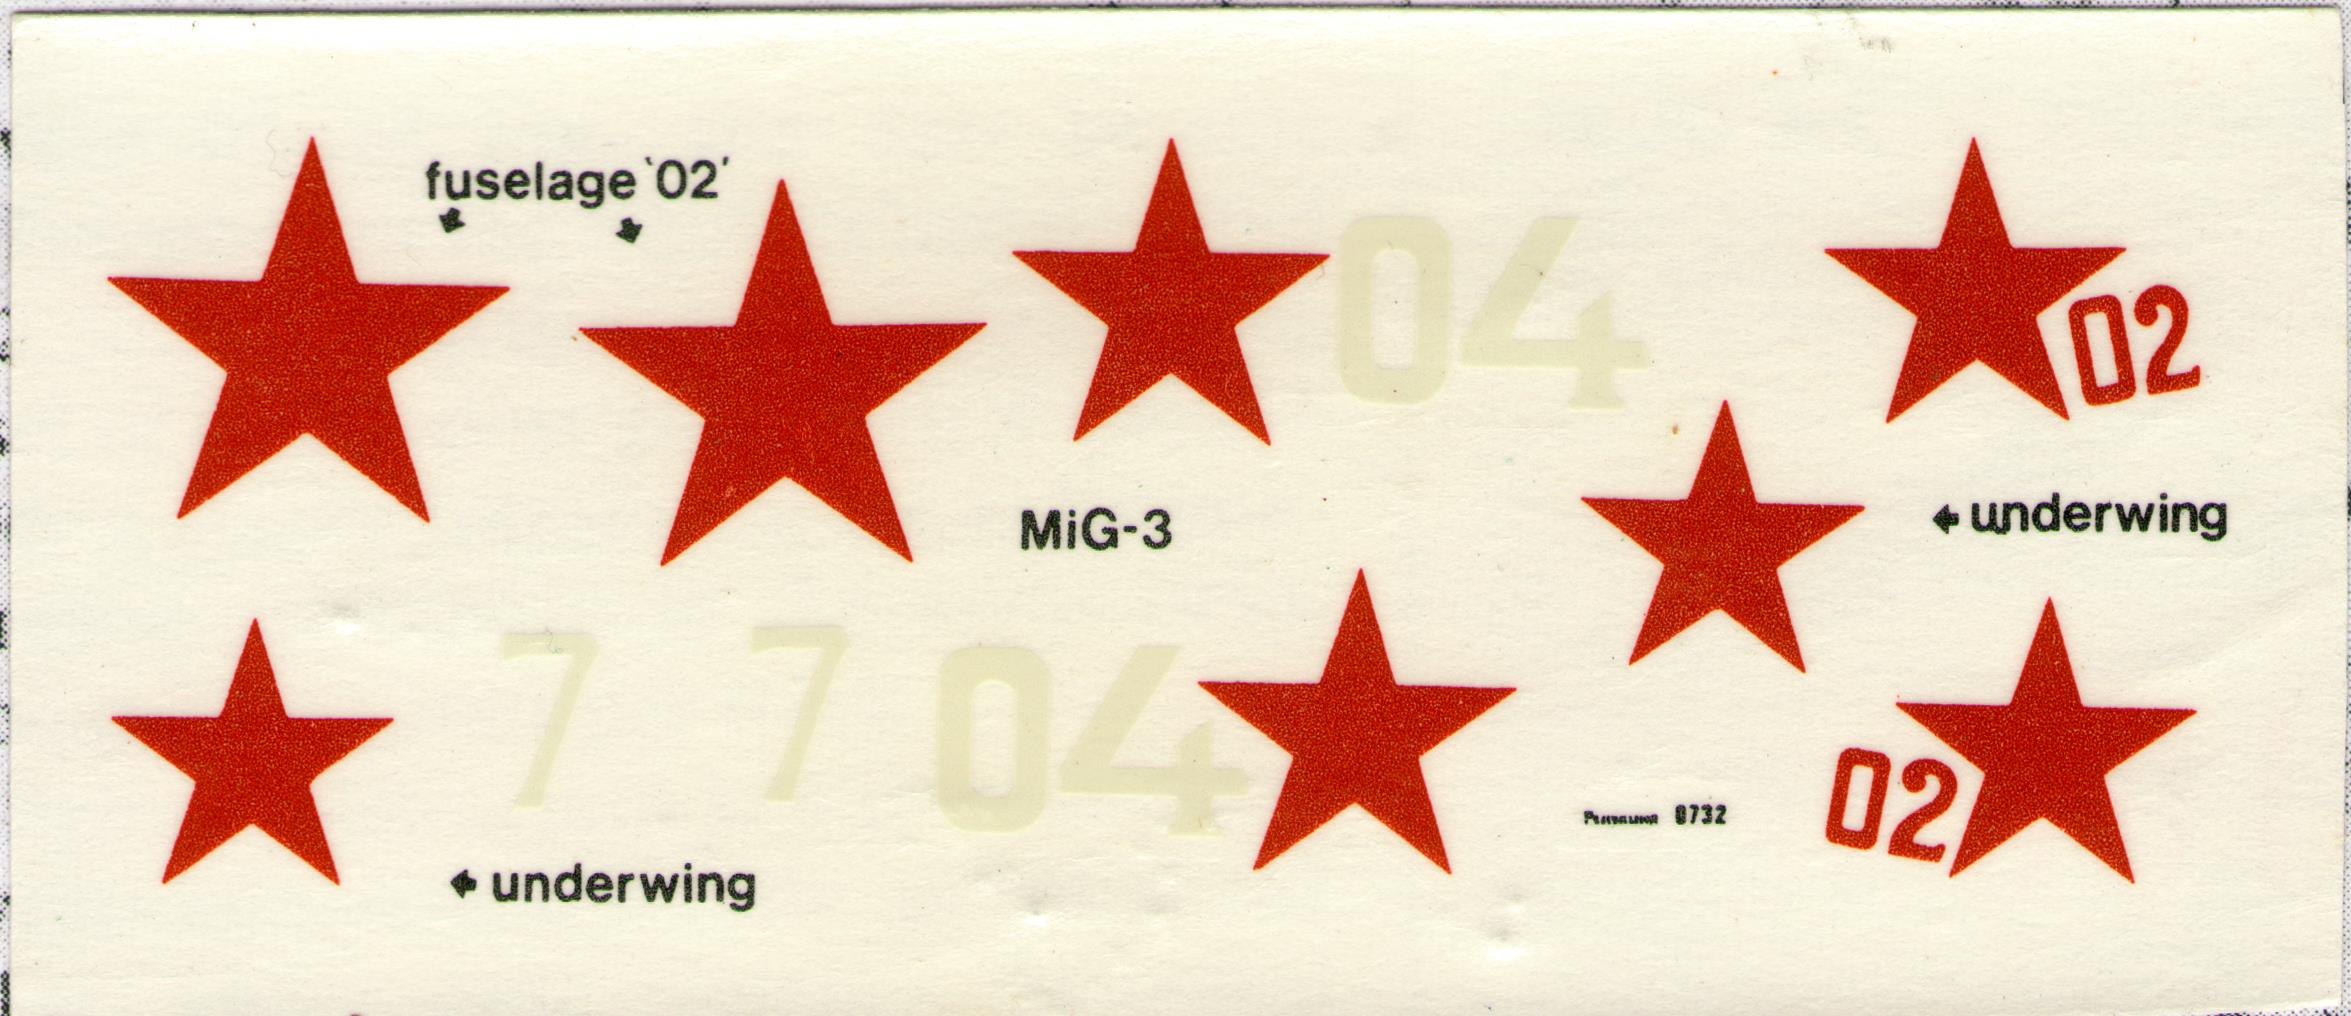 Red Star RS101 Mikoyan and Gurevich MiG-3, Red Star Model Kits Ltd, 1984 декаль